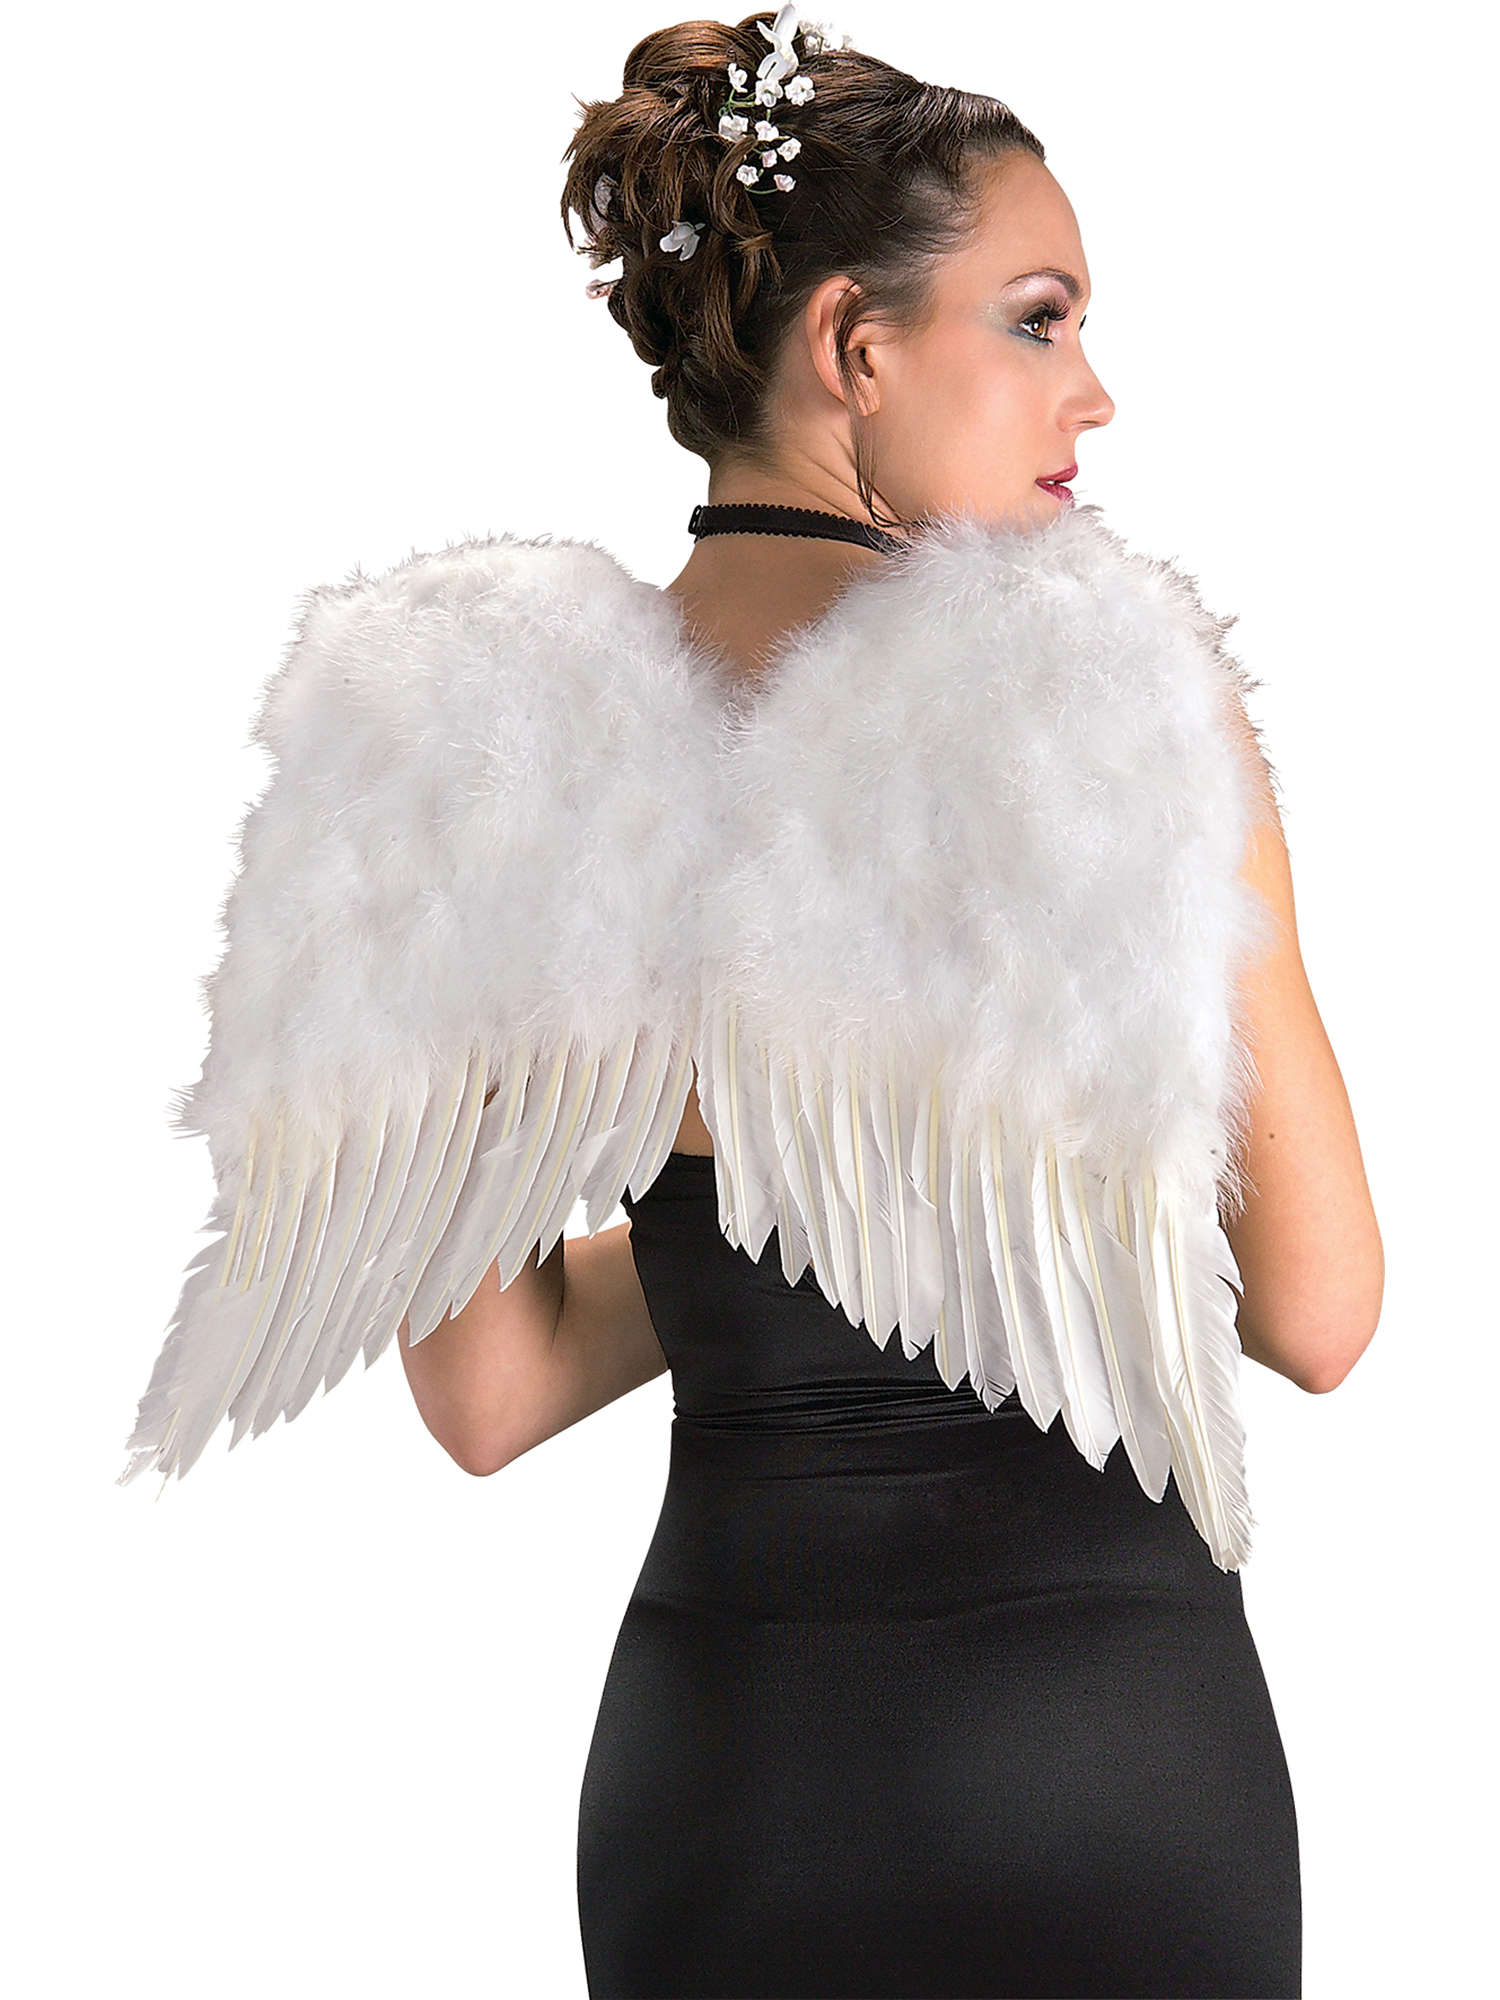 Angel Wings, White, Generic, Accessories, One Size, Front